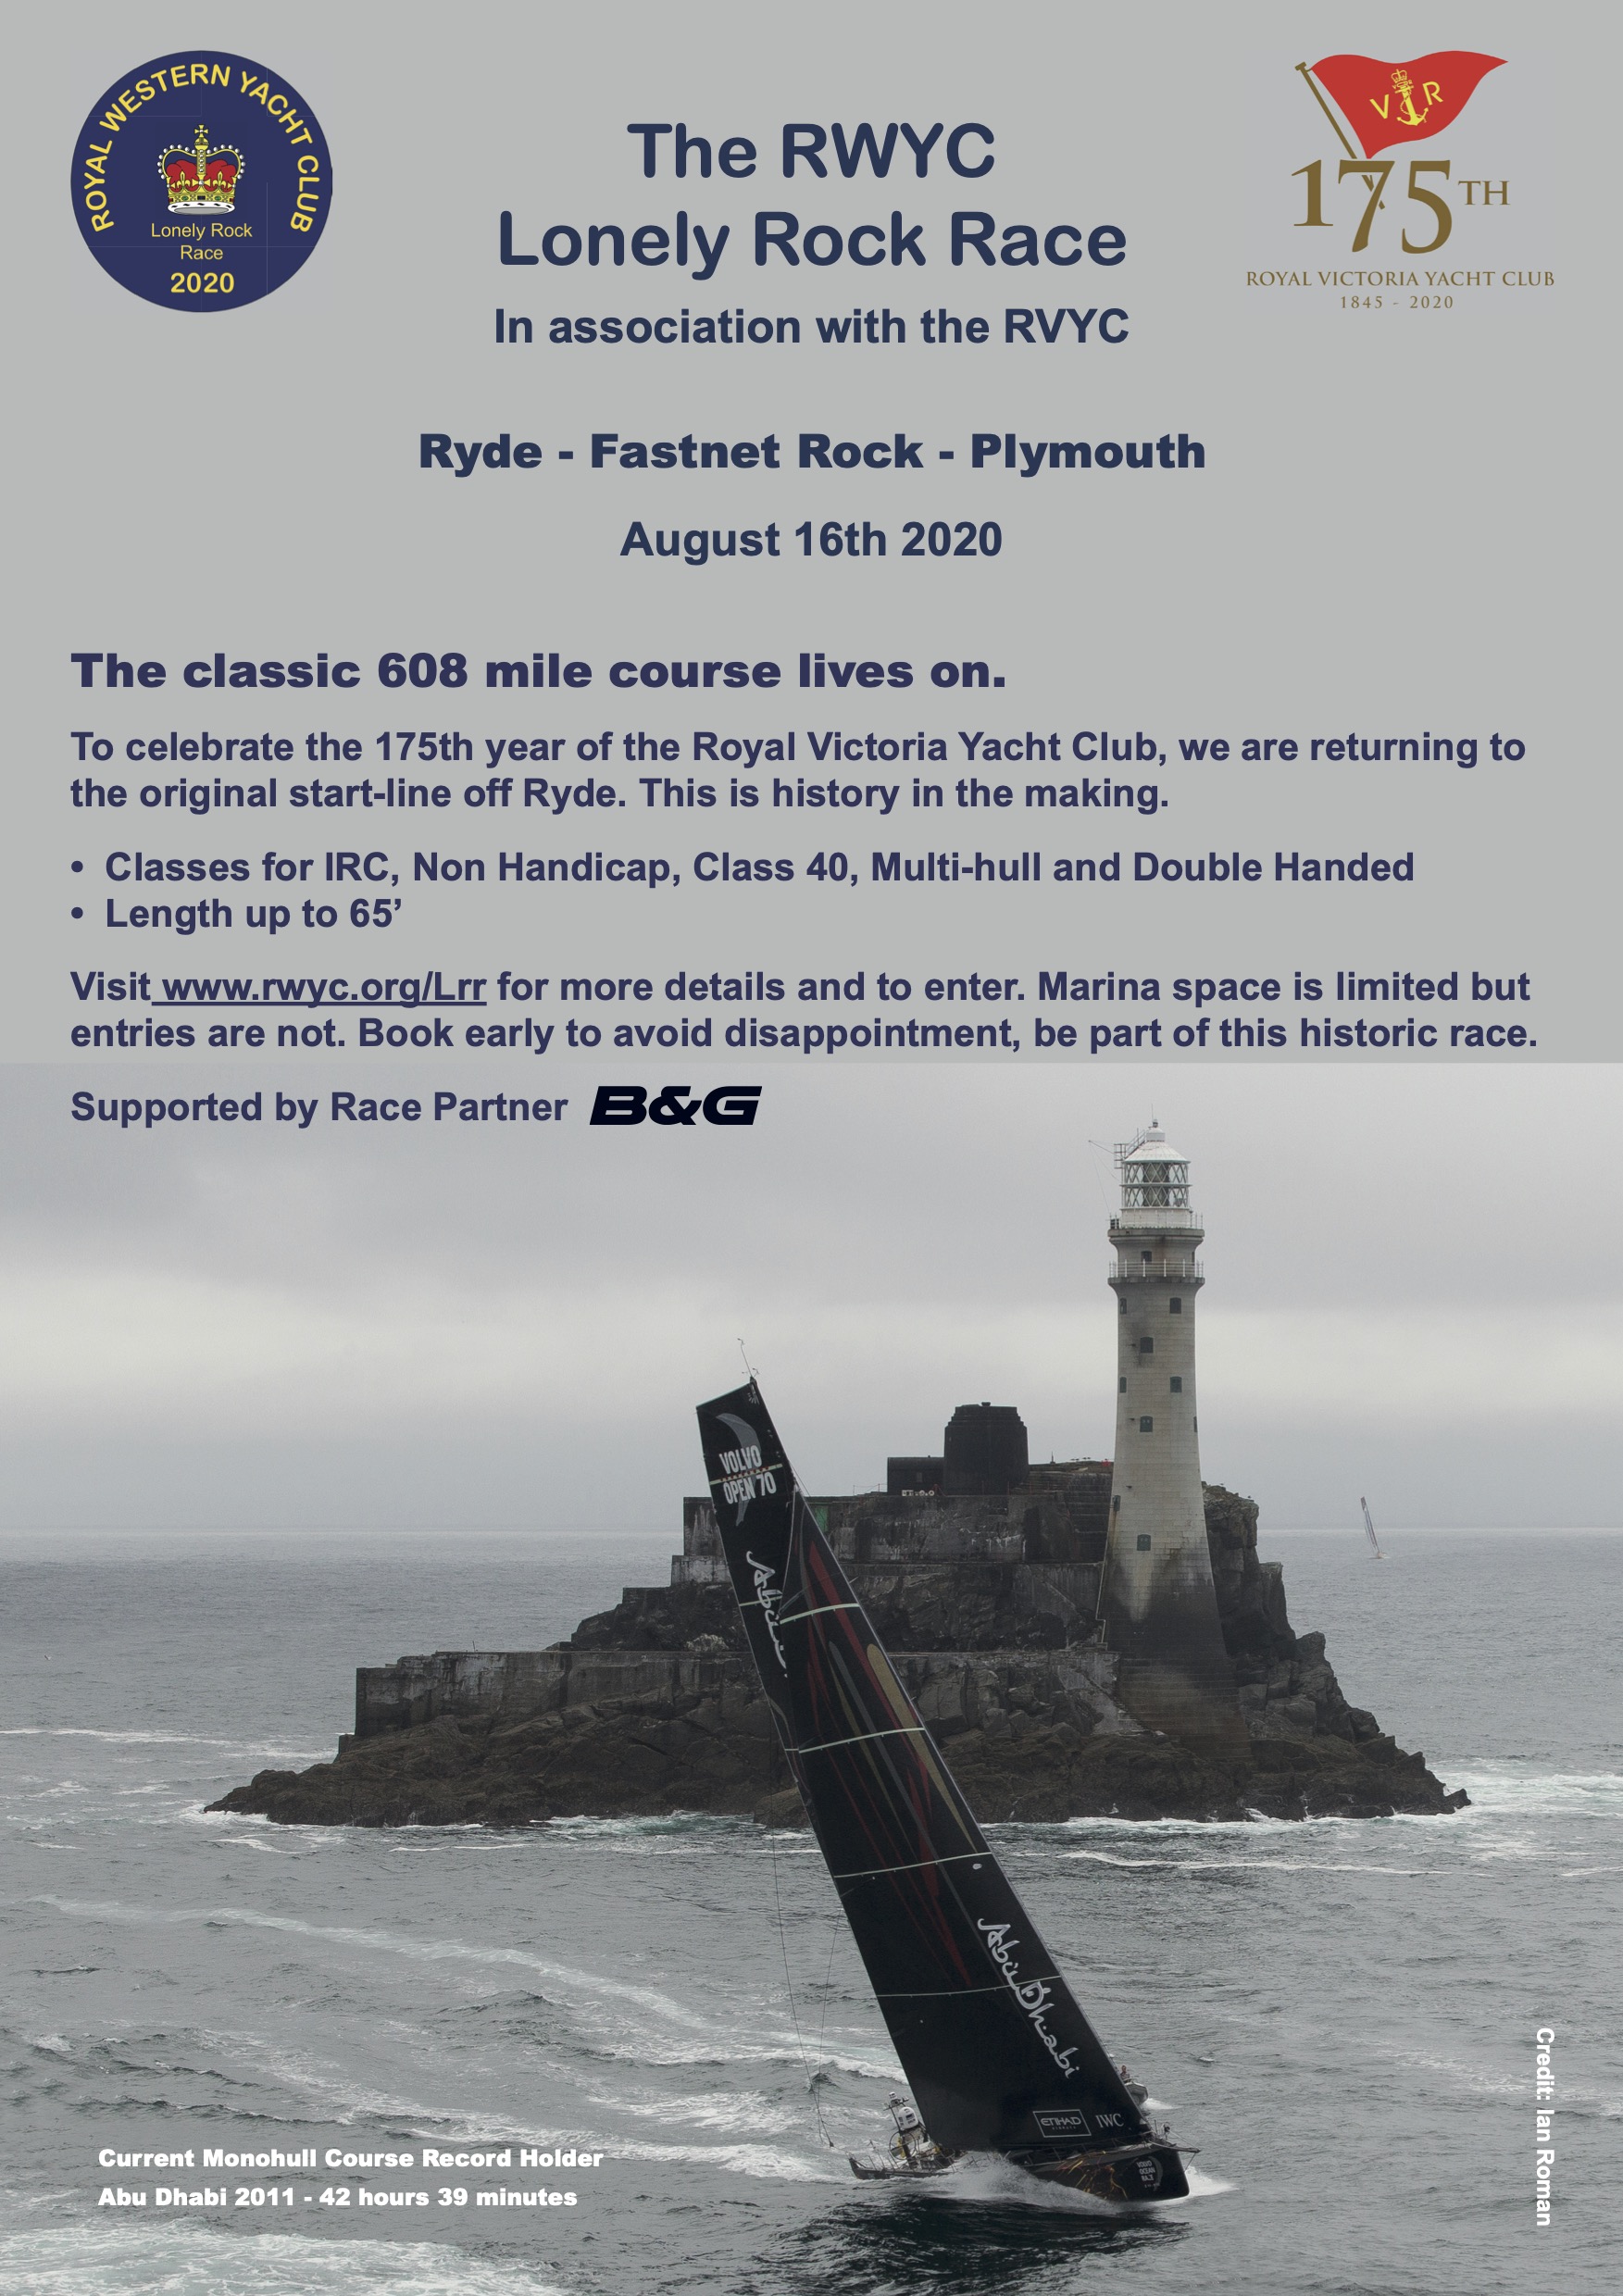 The RWYC Lonely Rock Race